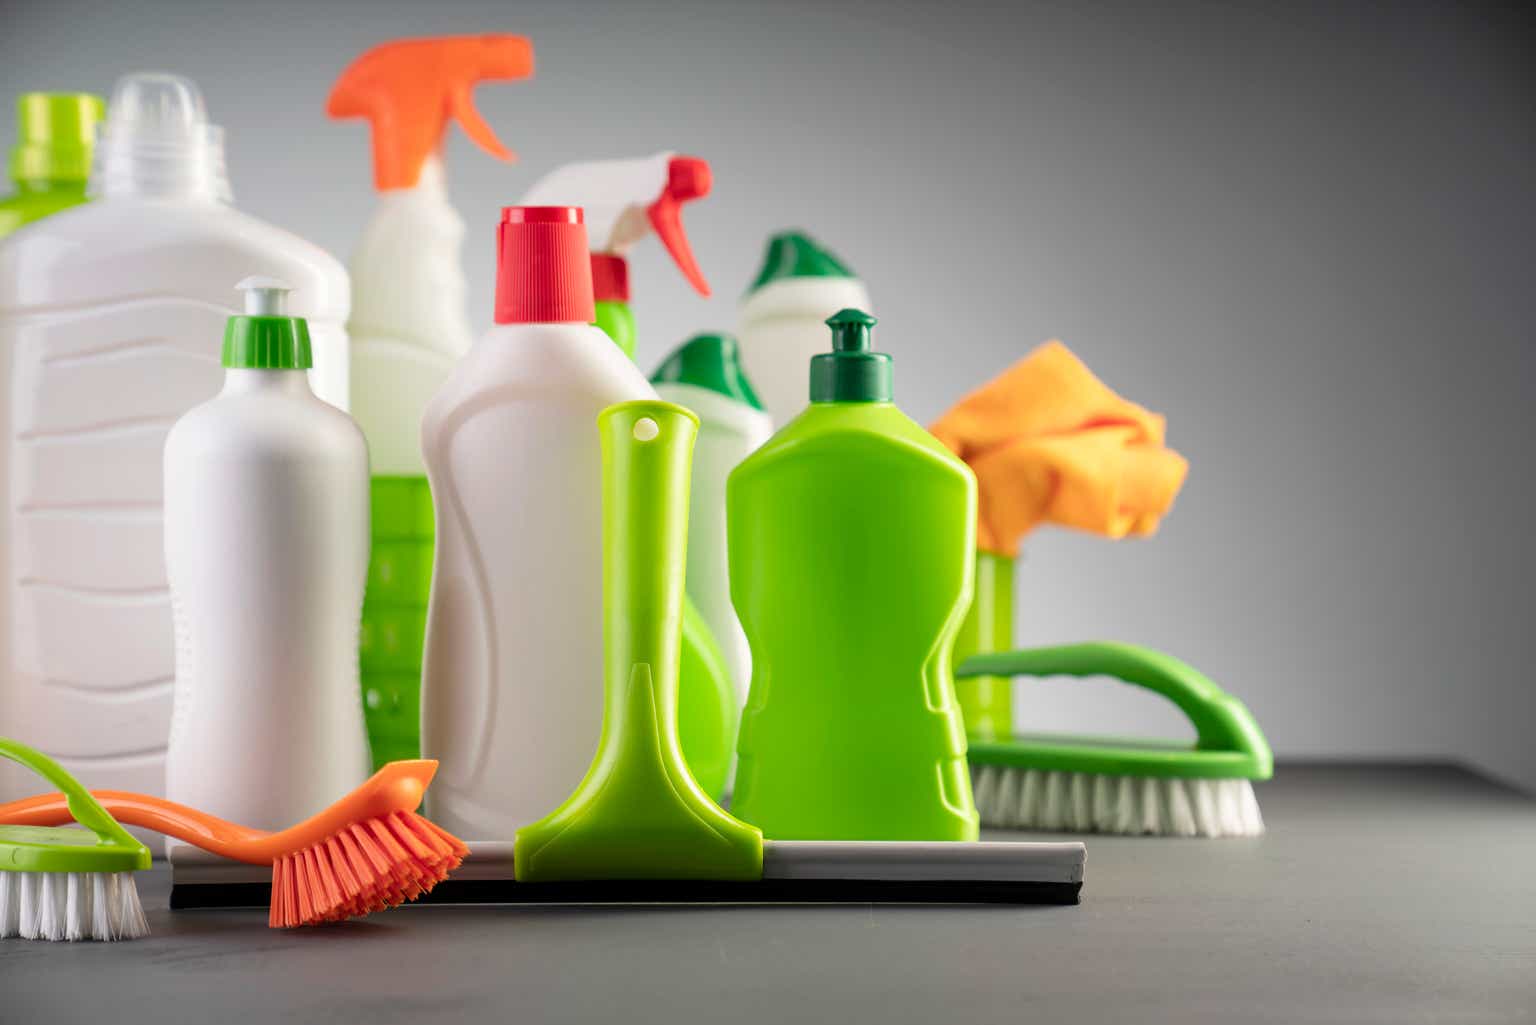 Clorox: Management''s Plan Is Working, Now A Good Time To Buy (Rating Upgrade)